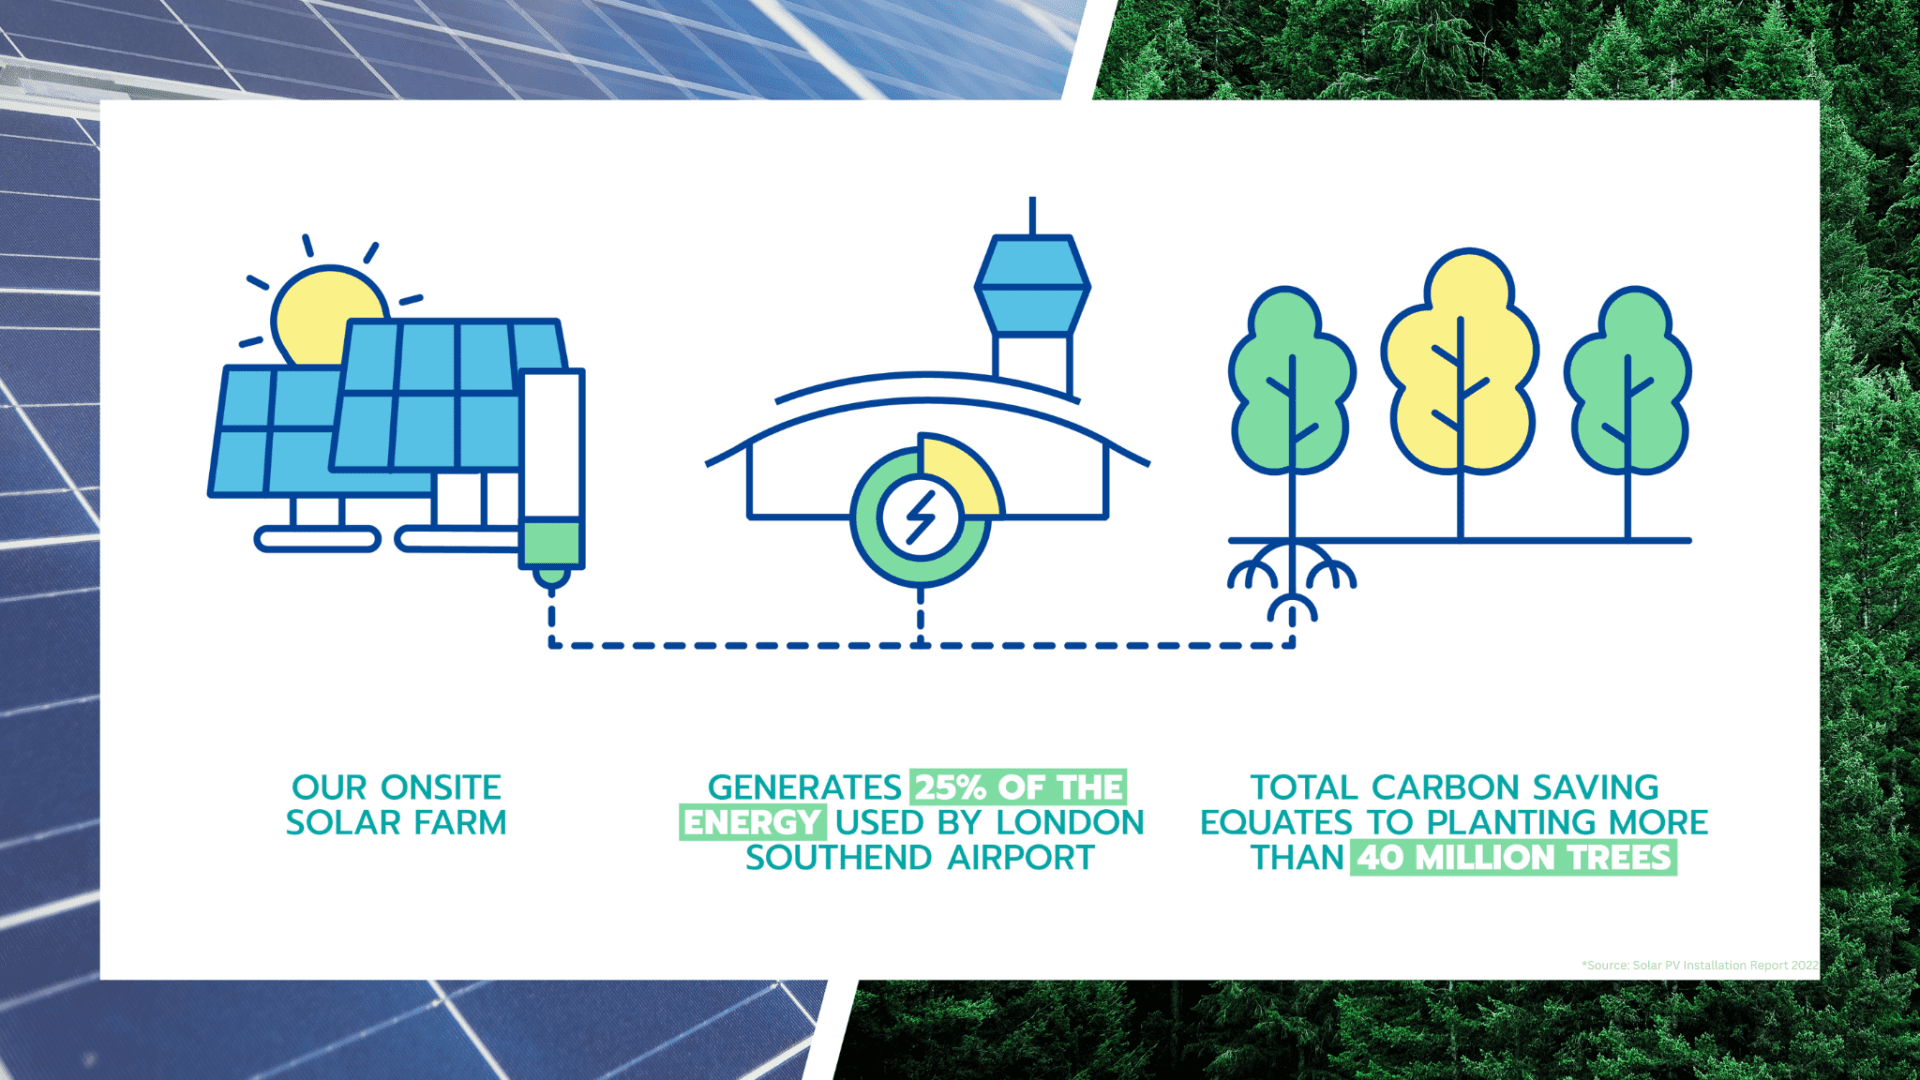 Our onsite solar farm generates 25% of the energy used by London Southend Airport. Total carbon saving equates to planting more than 40 million trees.